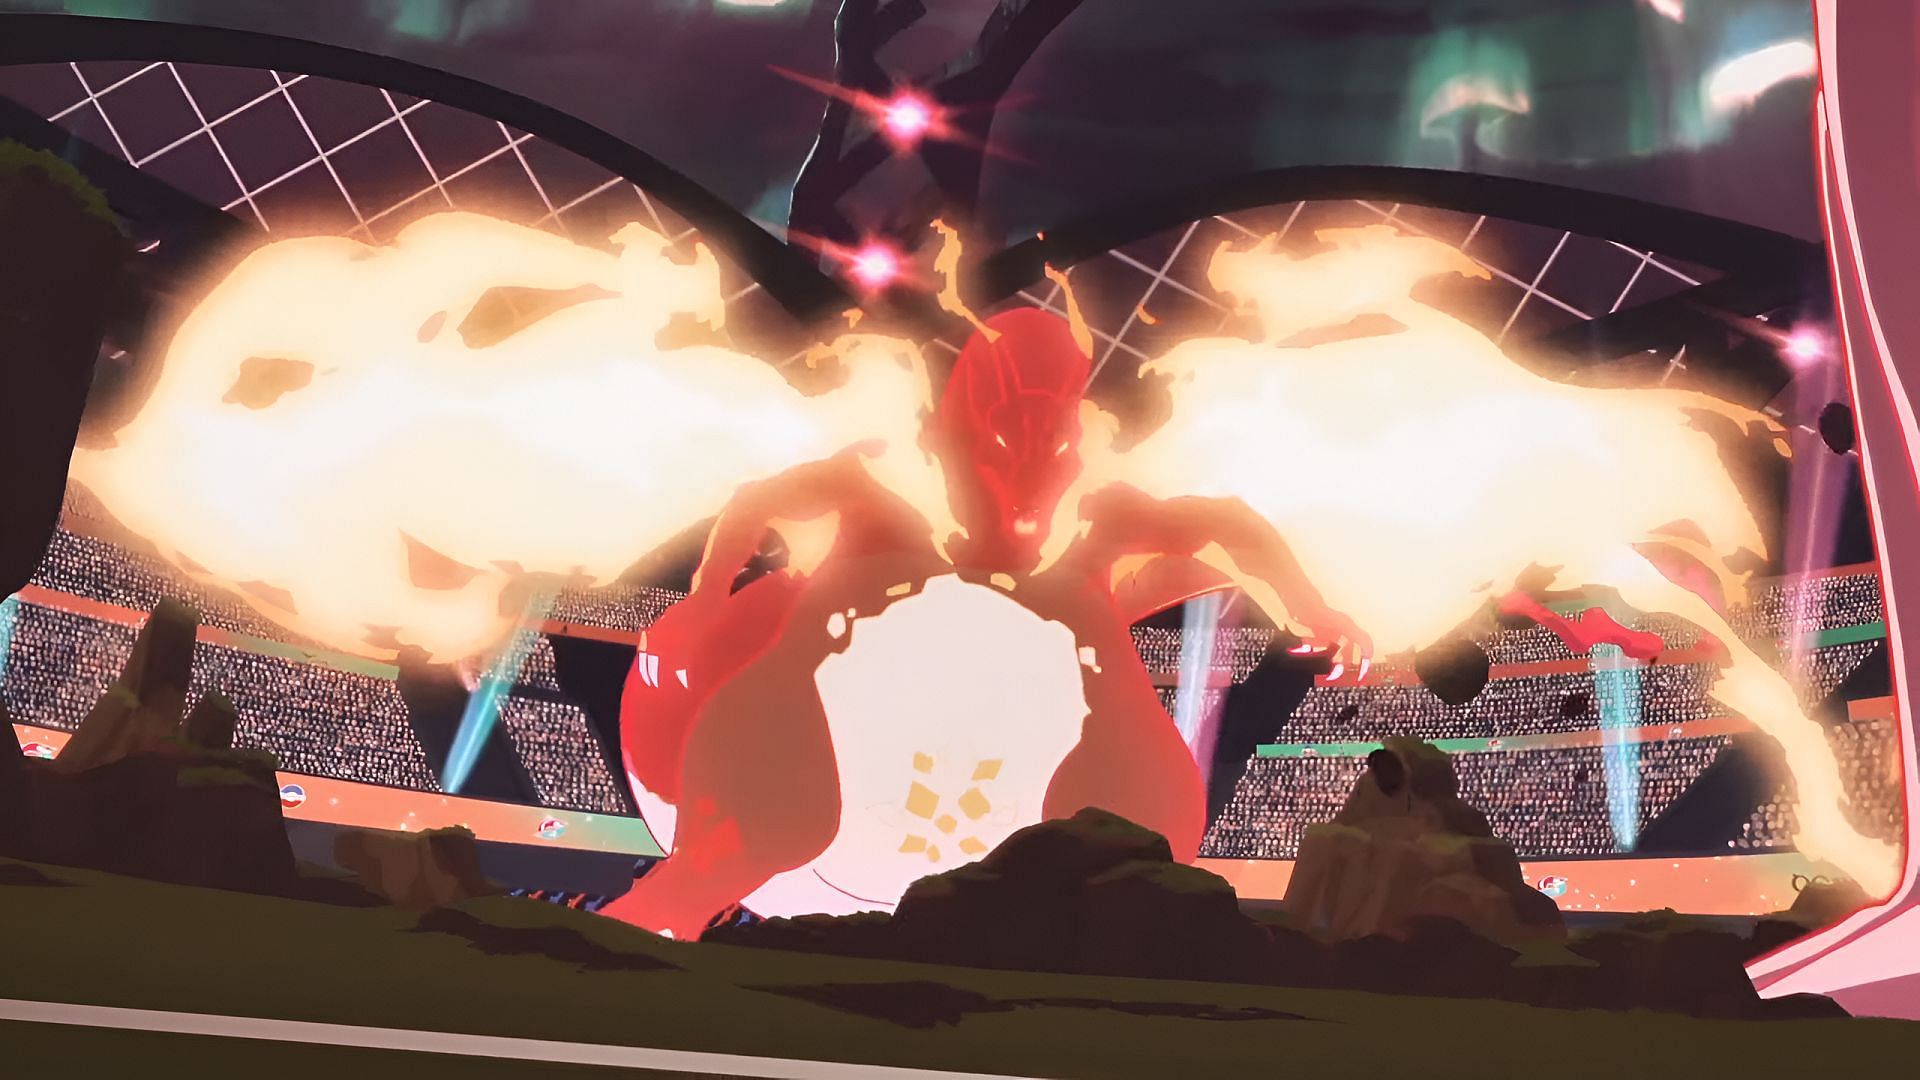 Leon&#039;s ace creature is the overwhelmingly strong Gigantamax Charizard (Image via The Pokemon Company)